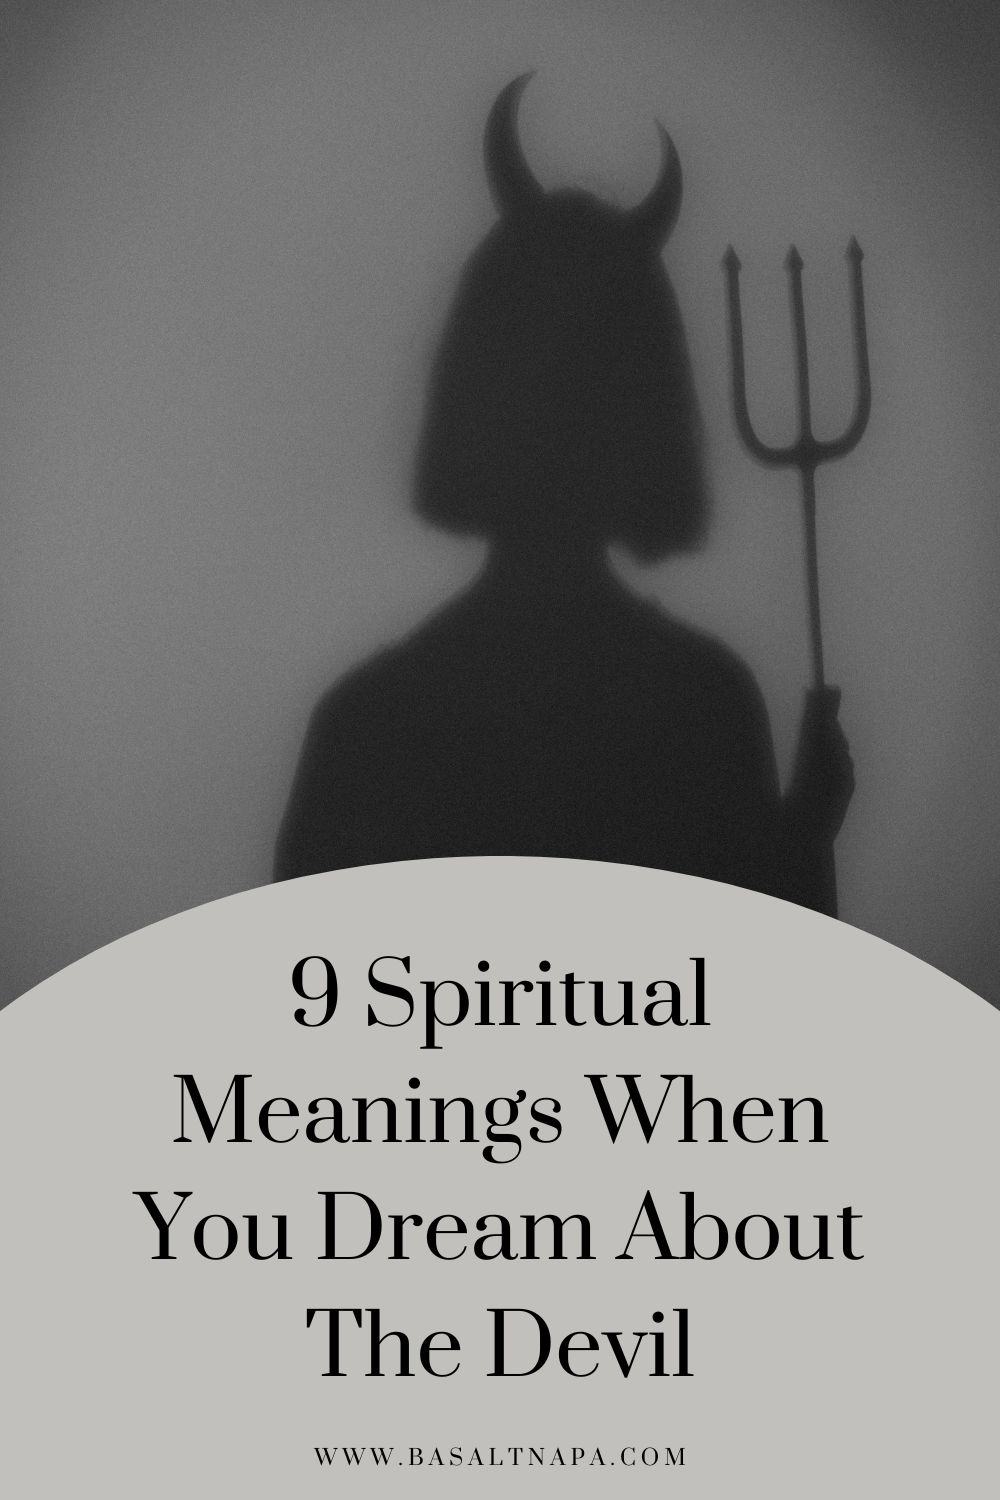 9 Spiritual Meanings When You Dream About The Devil